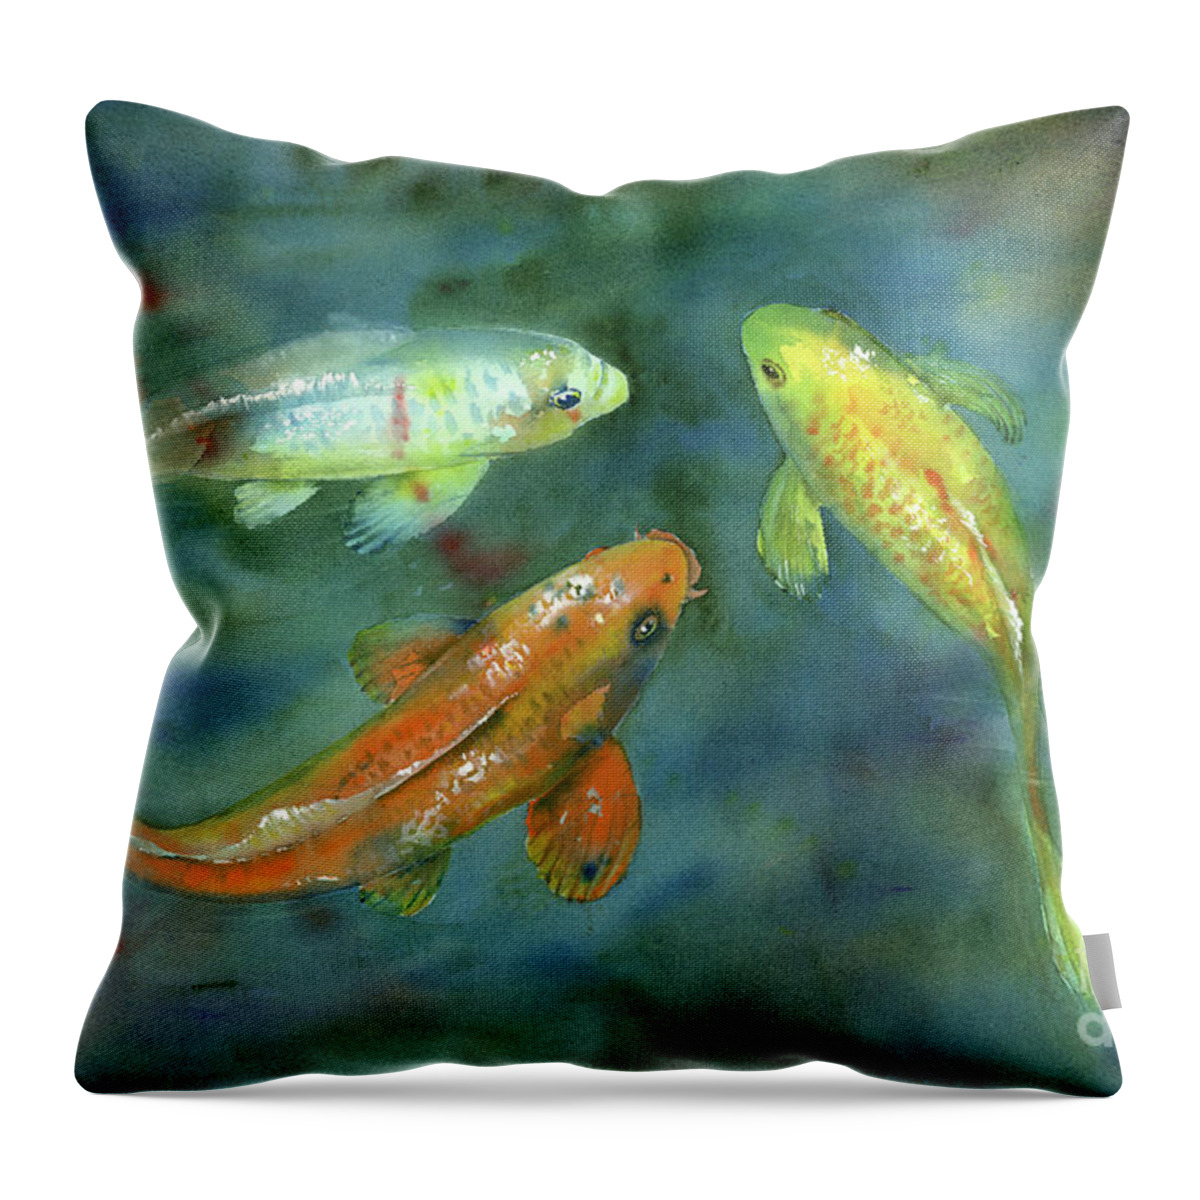 Watercolor Koi Throw Pillow featuring the painting Whispering Koi by Amy Kirkpatrick